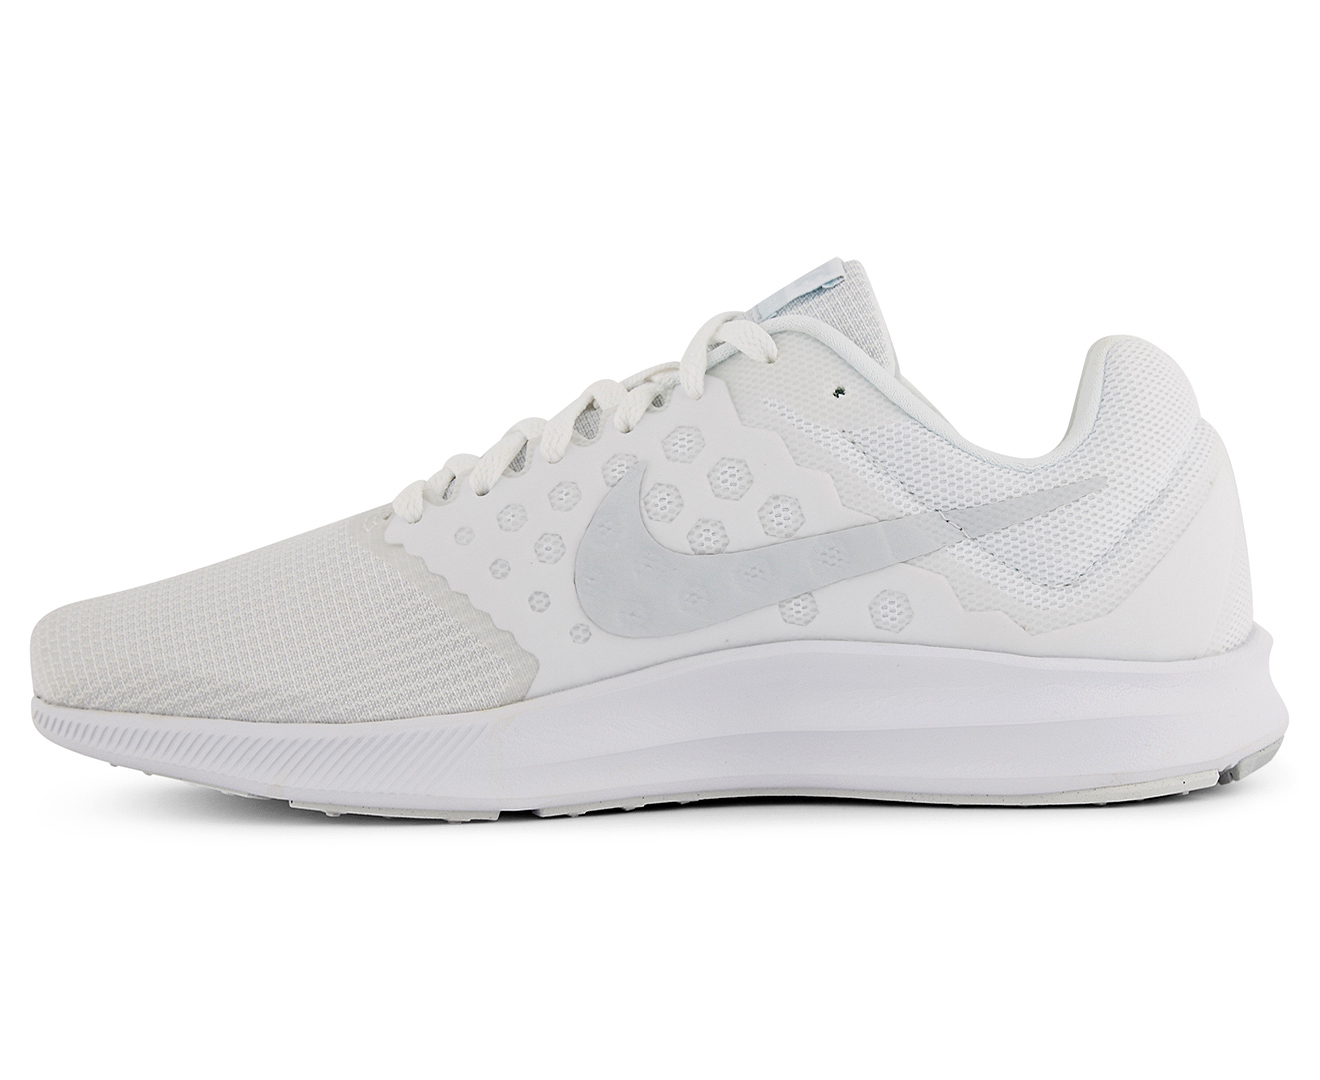 Nike Women's Downshifter 7 Shoe - White/Platinum | Great daily deals at ...